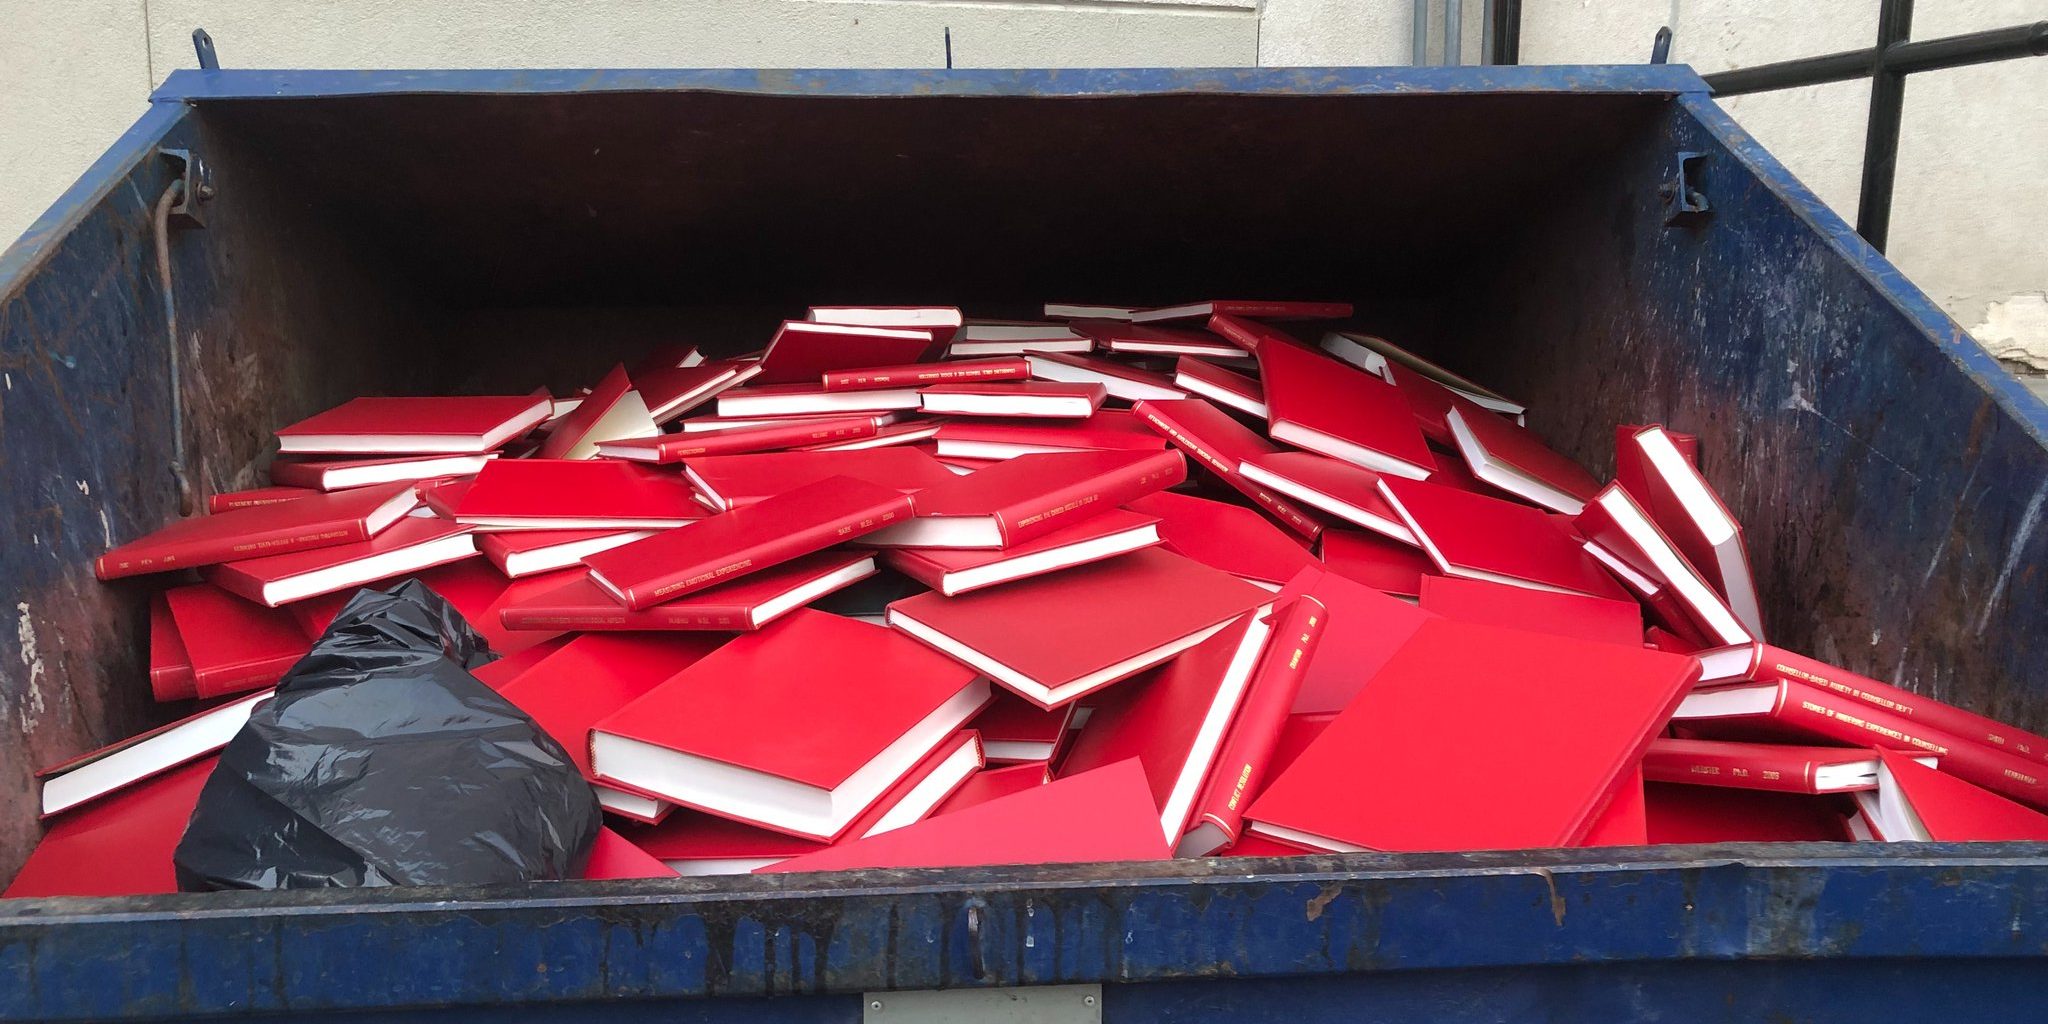 thrown out dissertations in dumpster